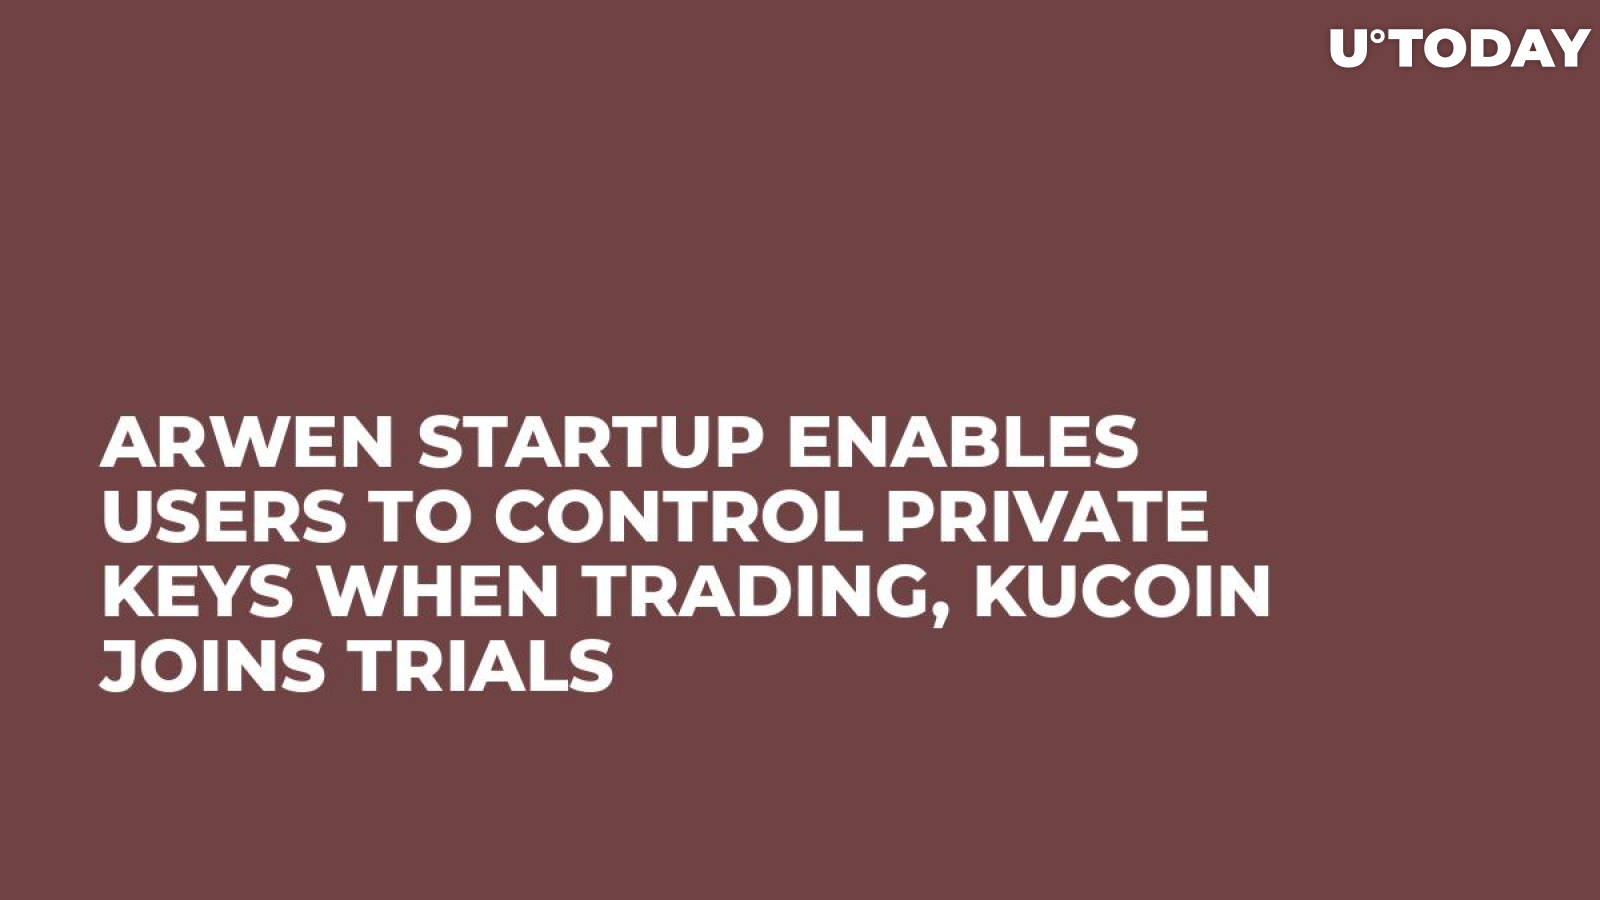 Arwen Startup Enables Users to Control Private Keys When Trading, KuCoin Joins Trials